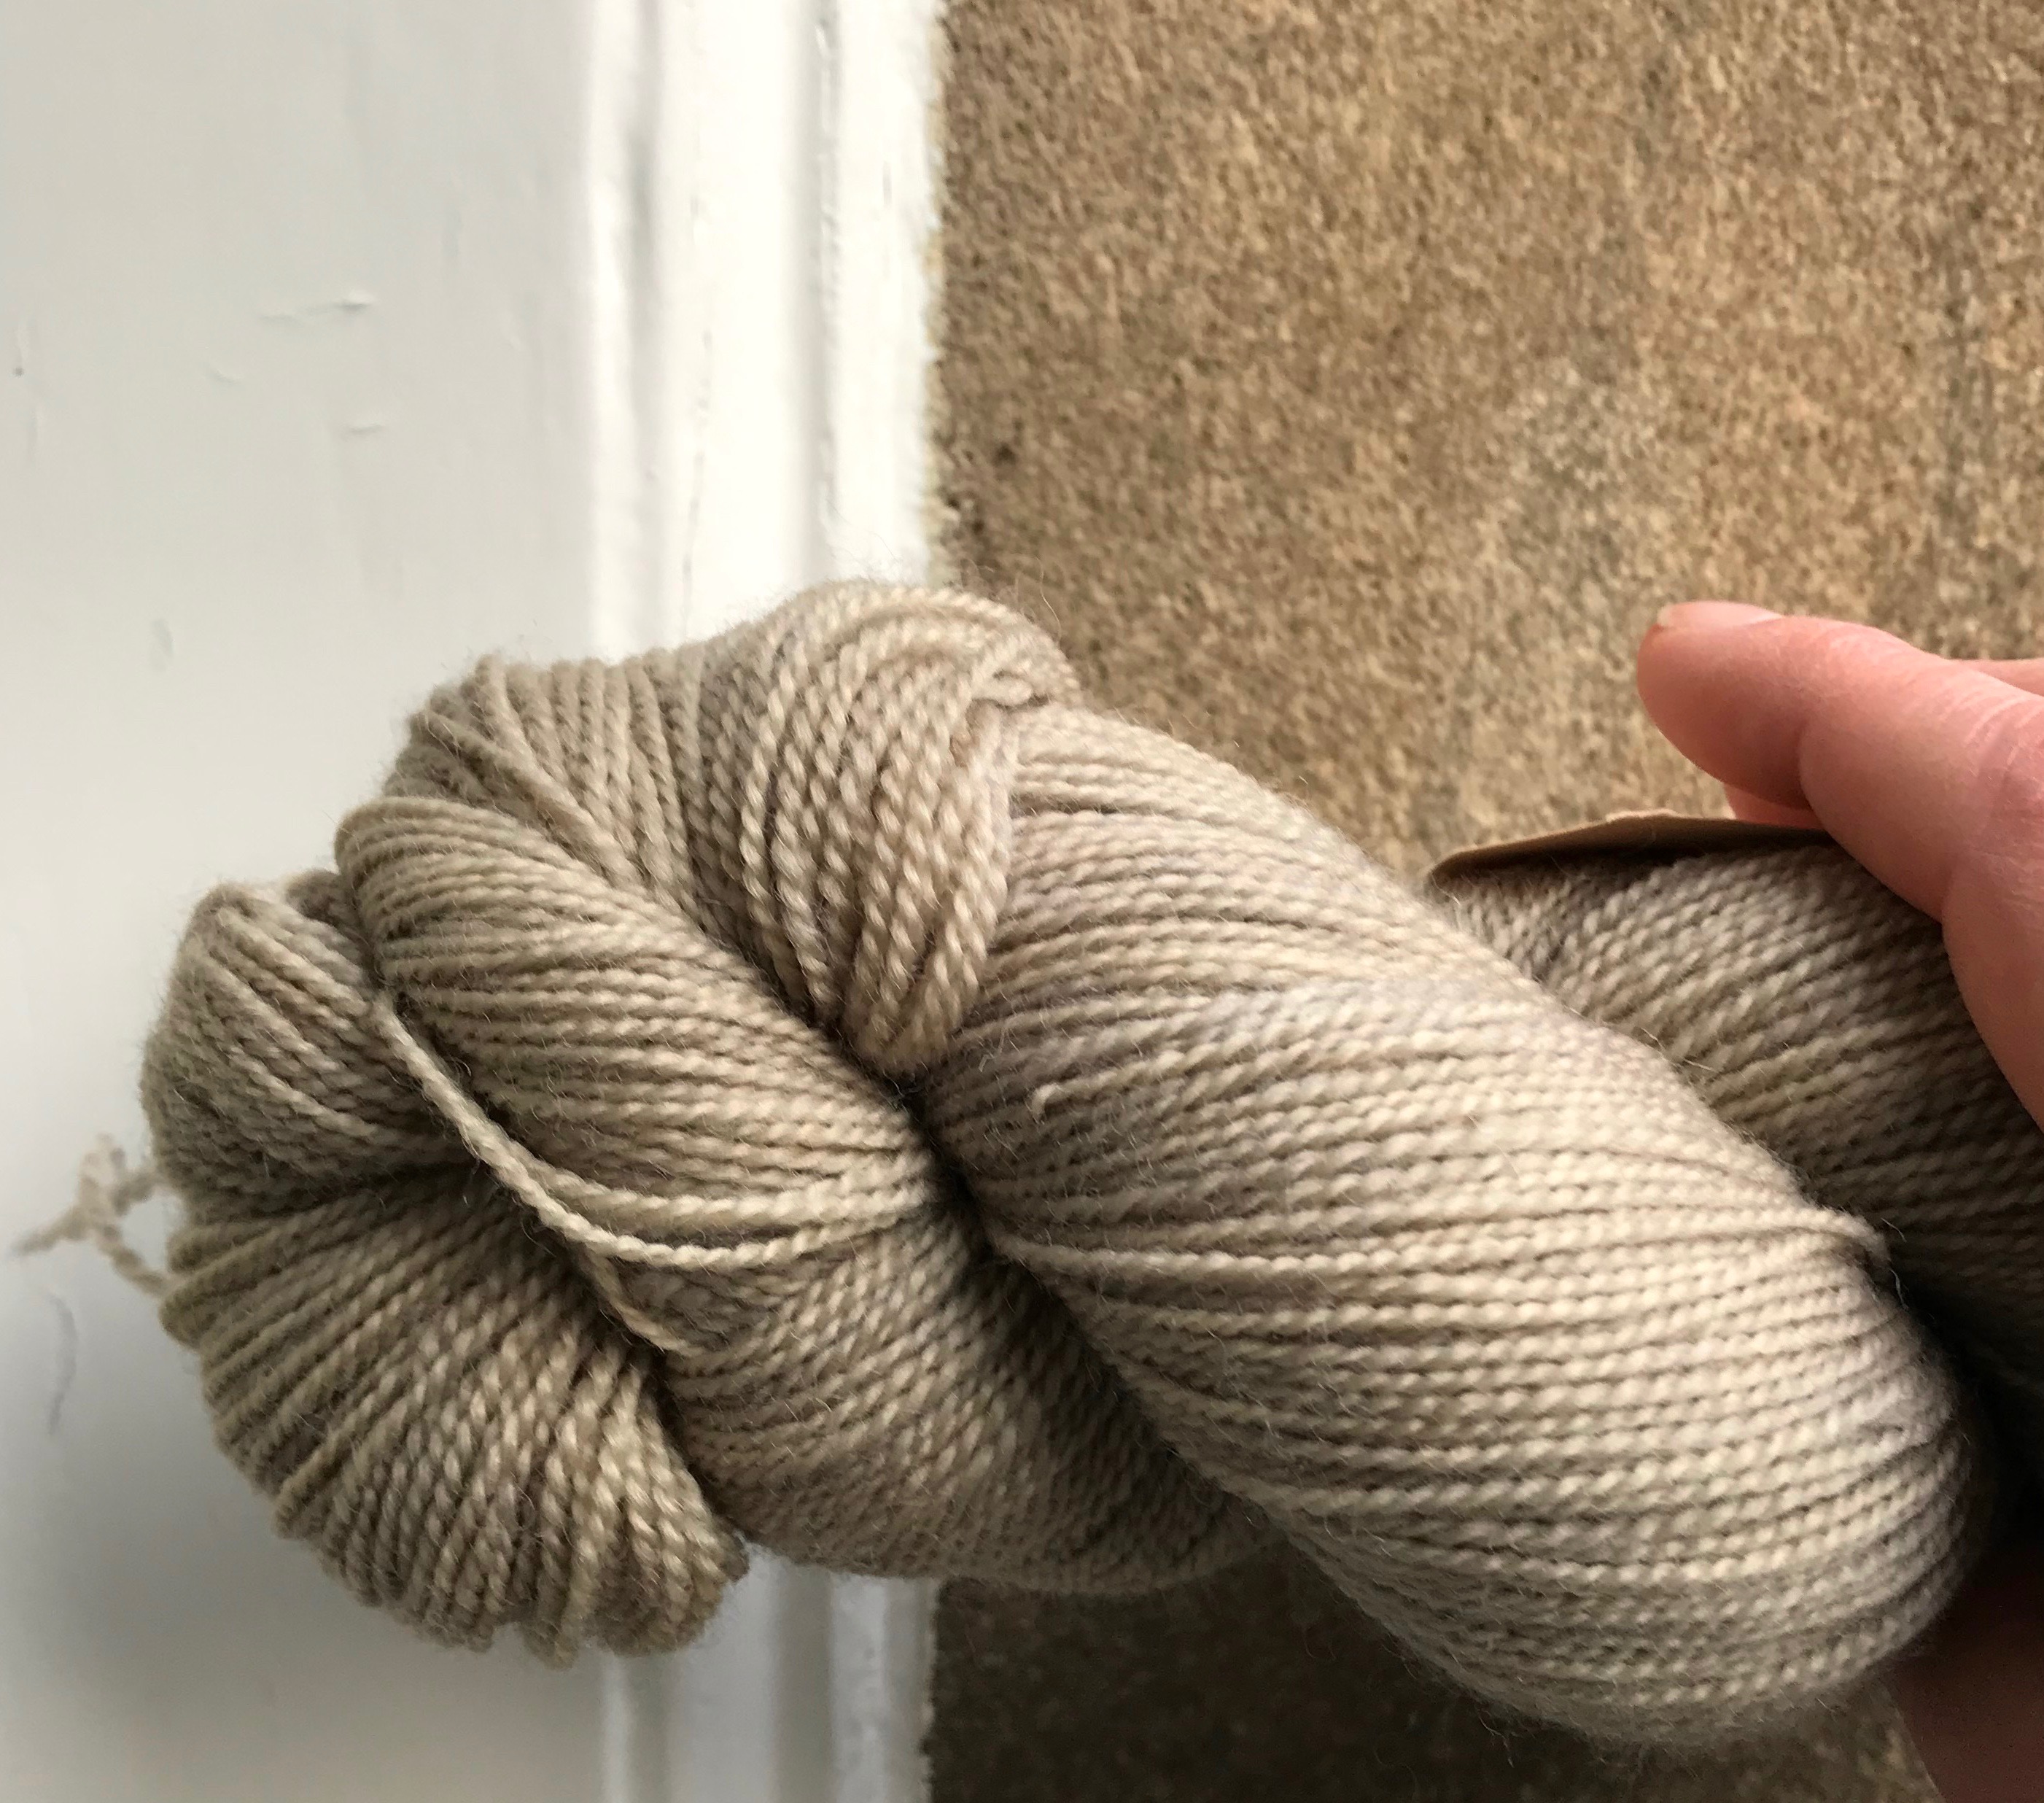 Skein of greige yarn held against a wall of the same colourway